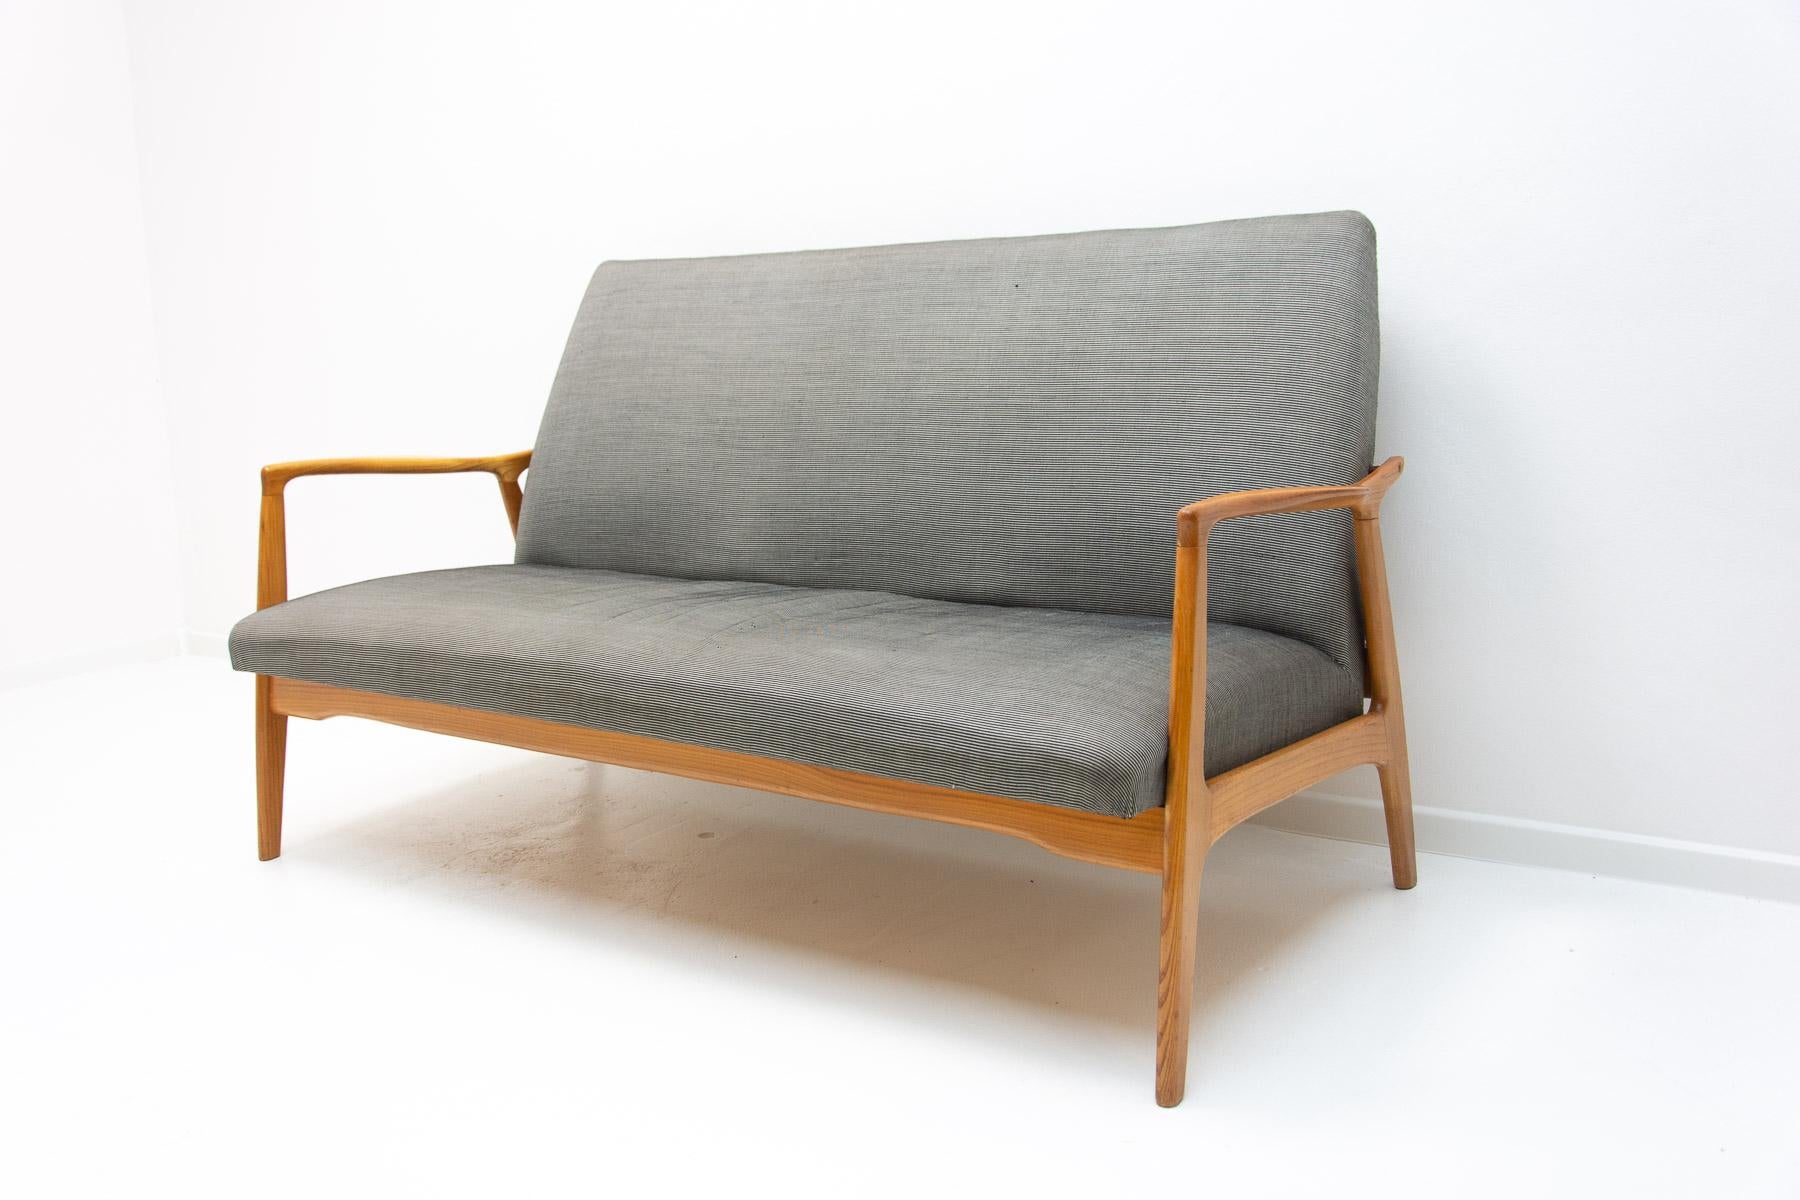 This Scandinavian style sofa was made by Krásná Jizba company in the former Czechoslovakia in the 1960´s. It´s upholstered with fabric. The structure is made of bent beech wood.

The sofa is overall in good Vintage condition, showing signs of age